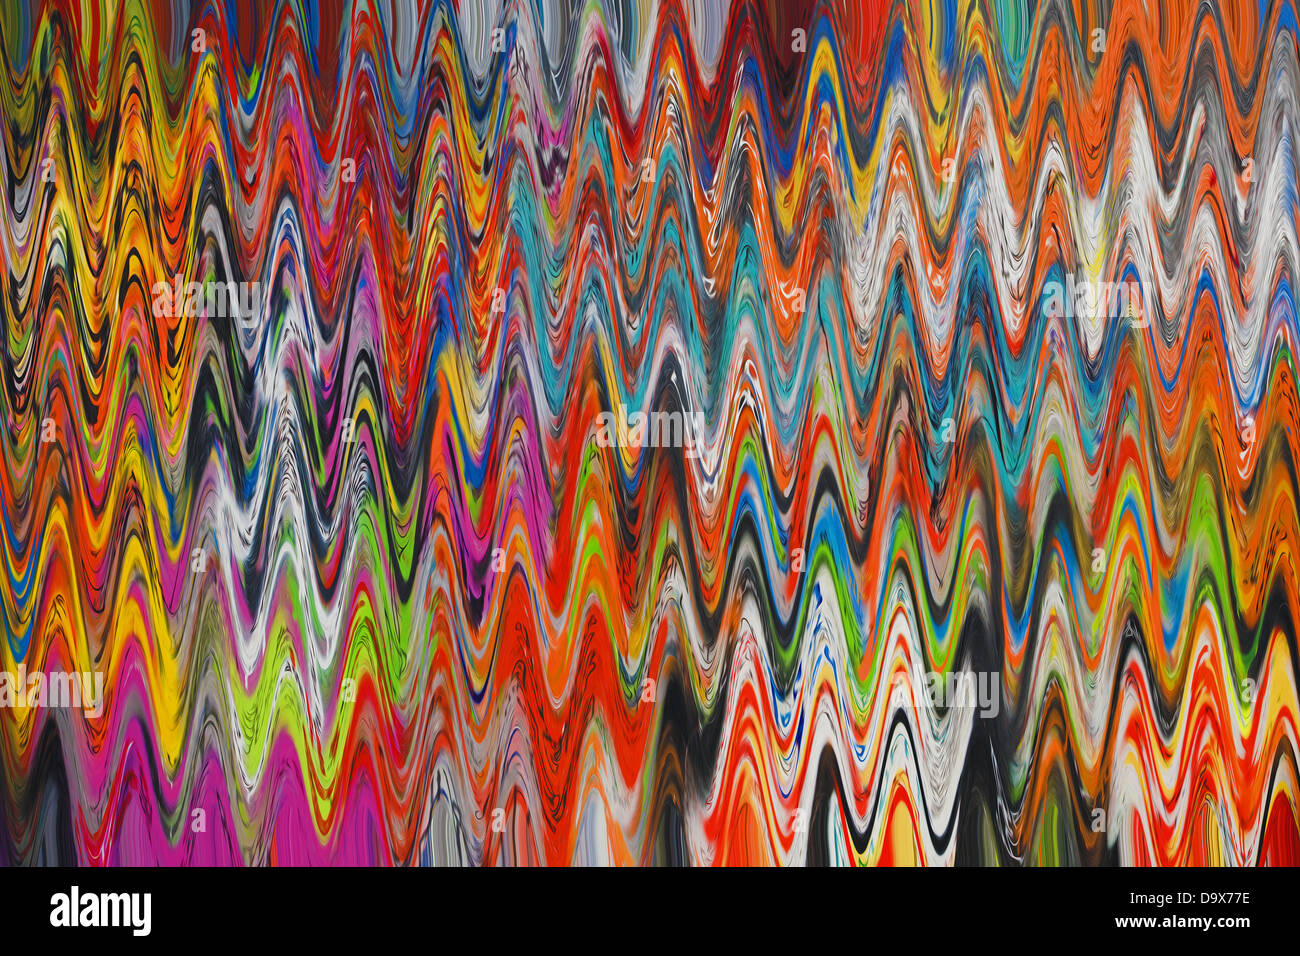 abstract digital art background Stock Photo